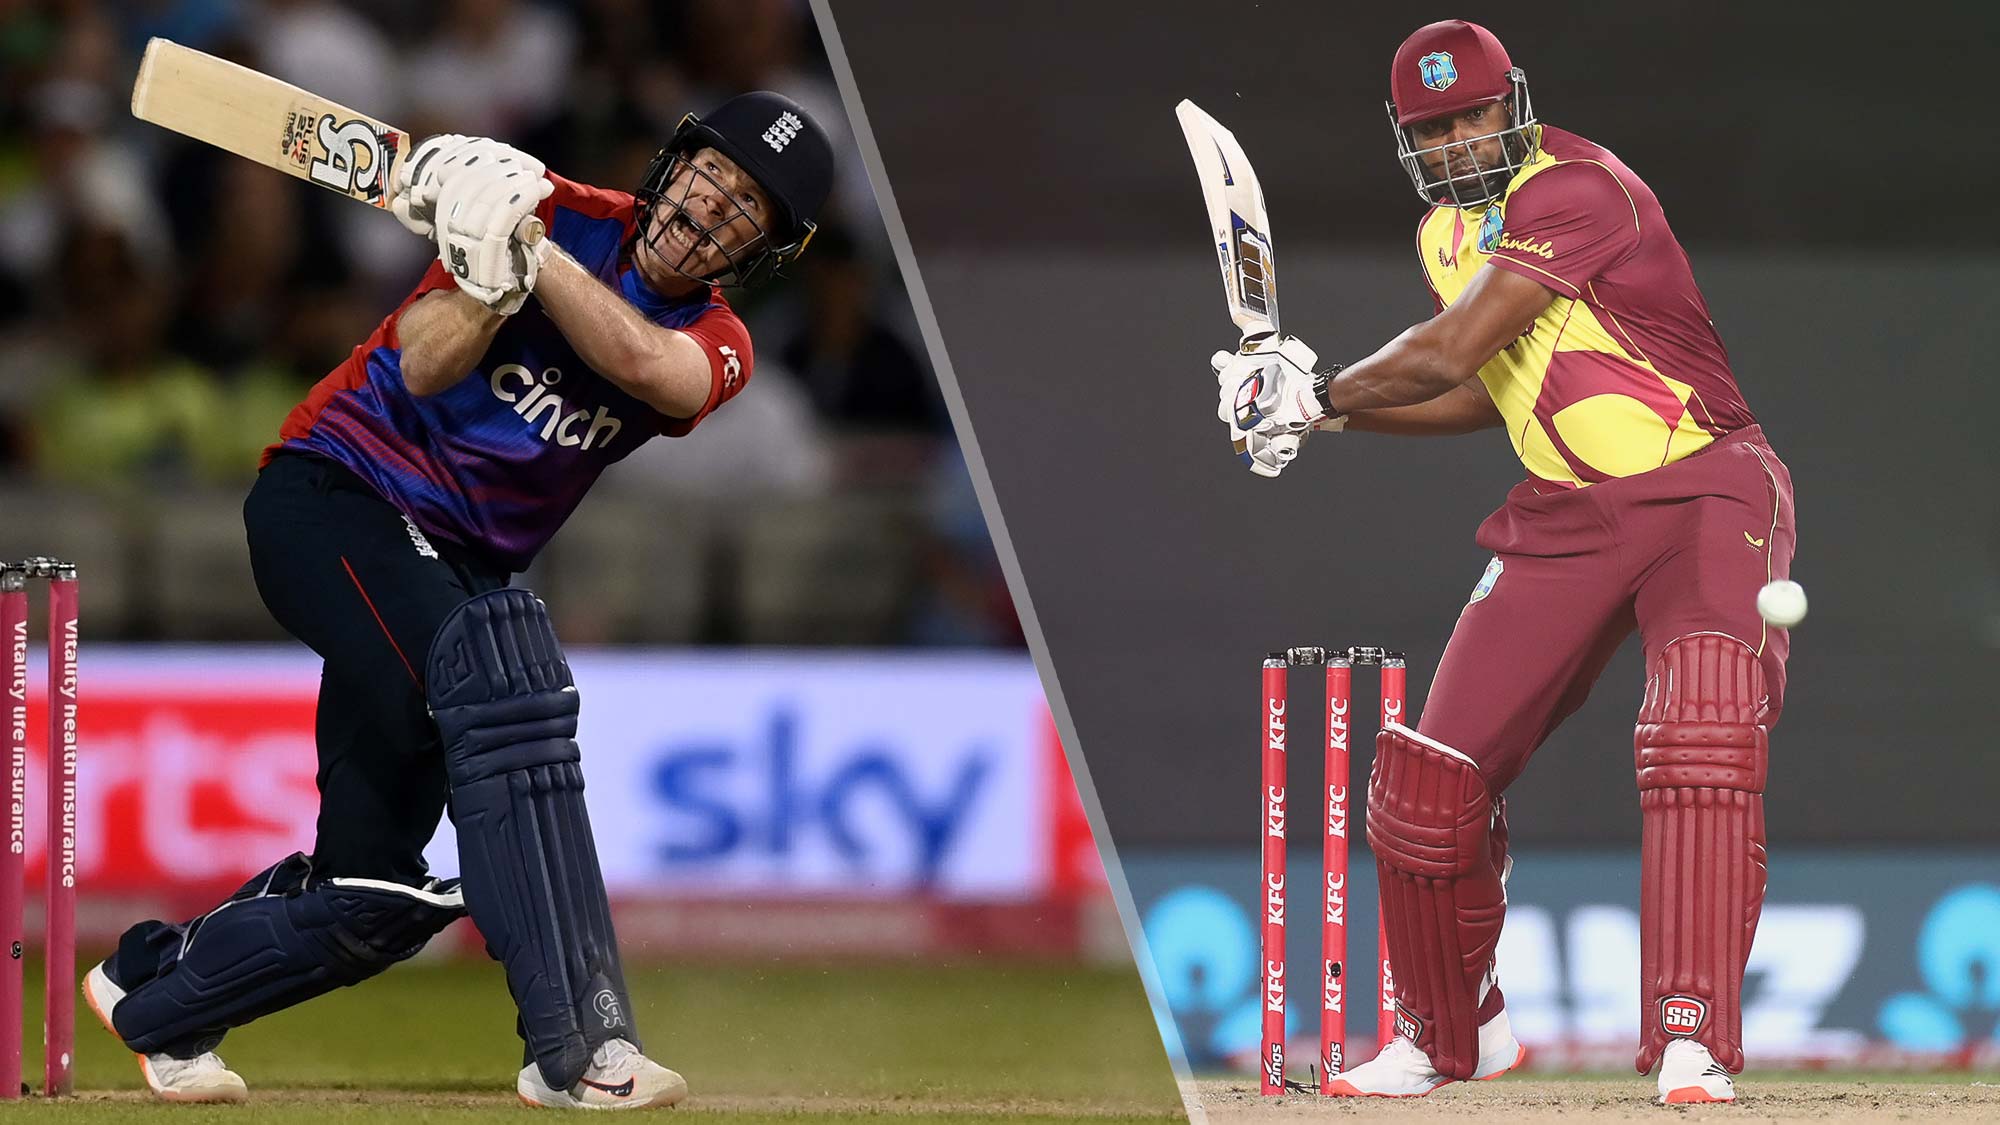 west indies cricket live streaming 2021